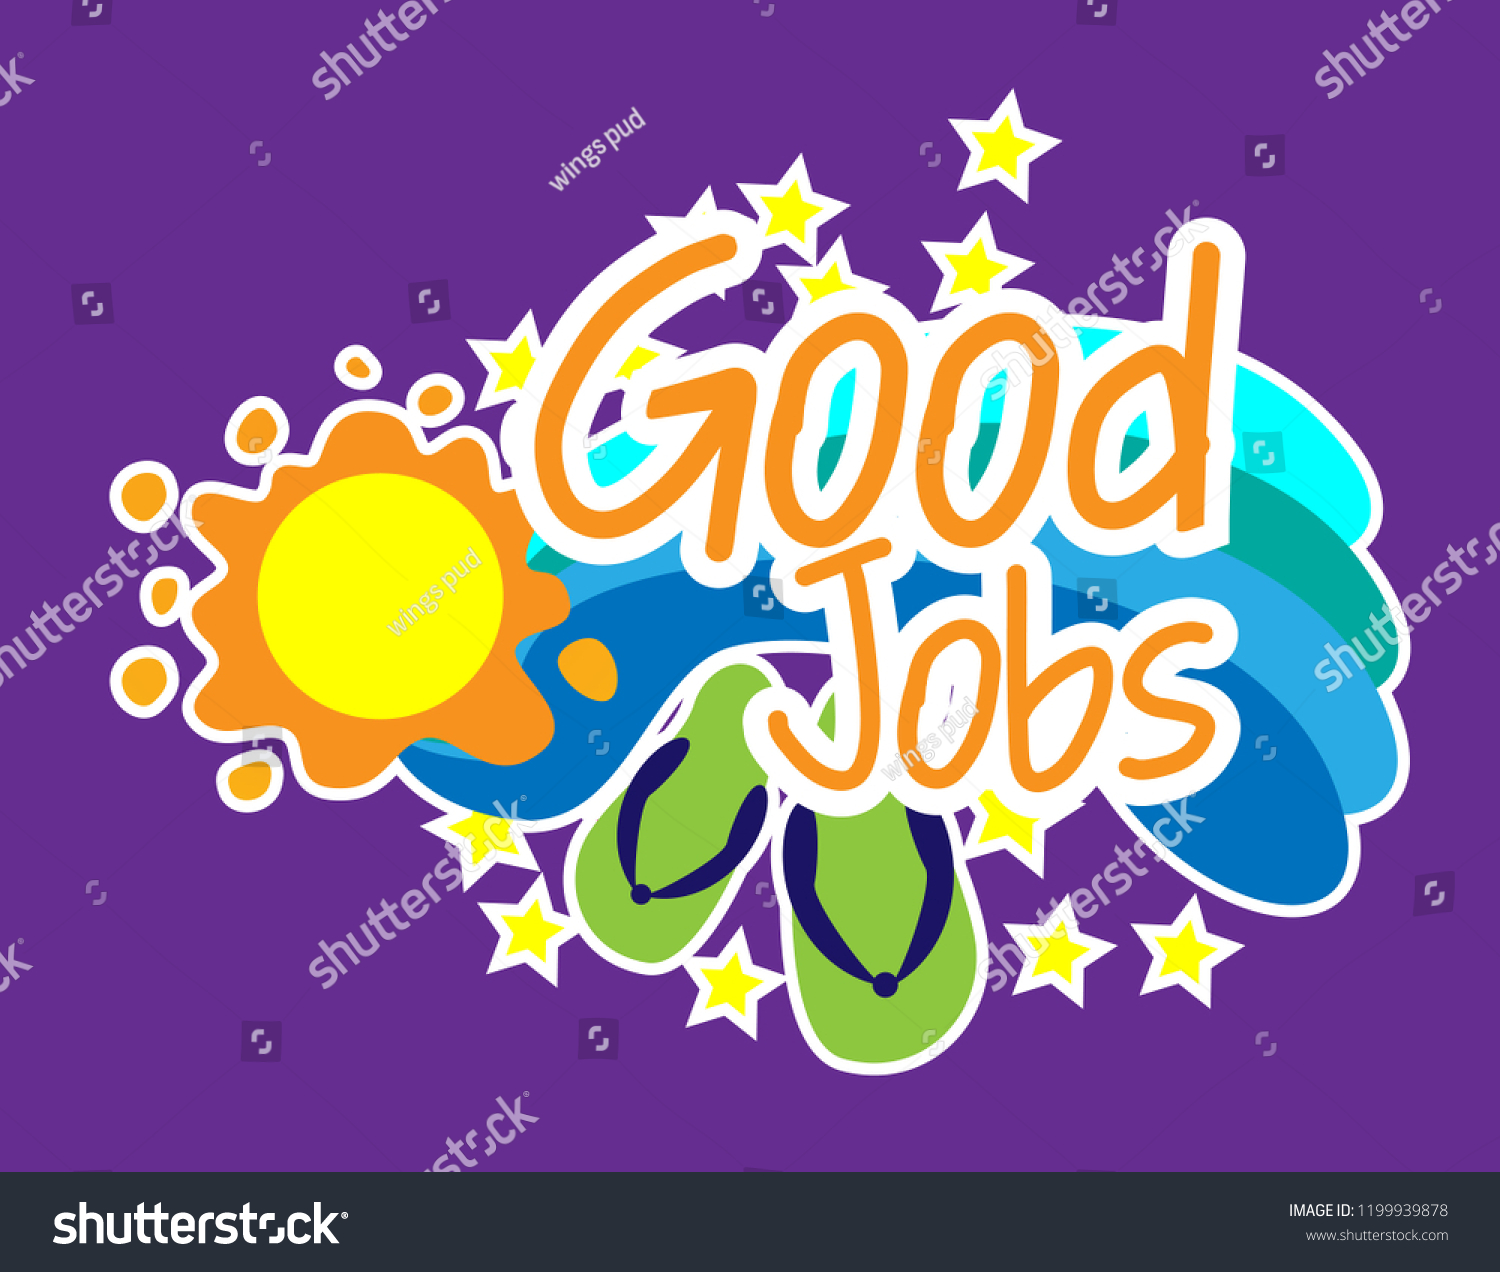 Good Jobs Greeting Card Background Banner Stock Vector Royalty Free